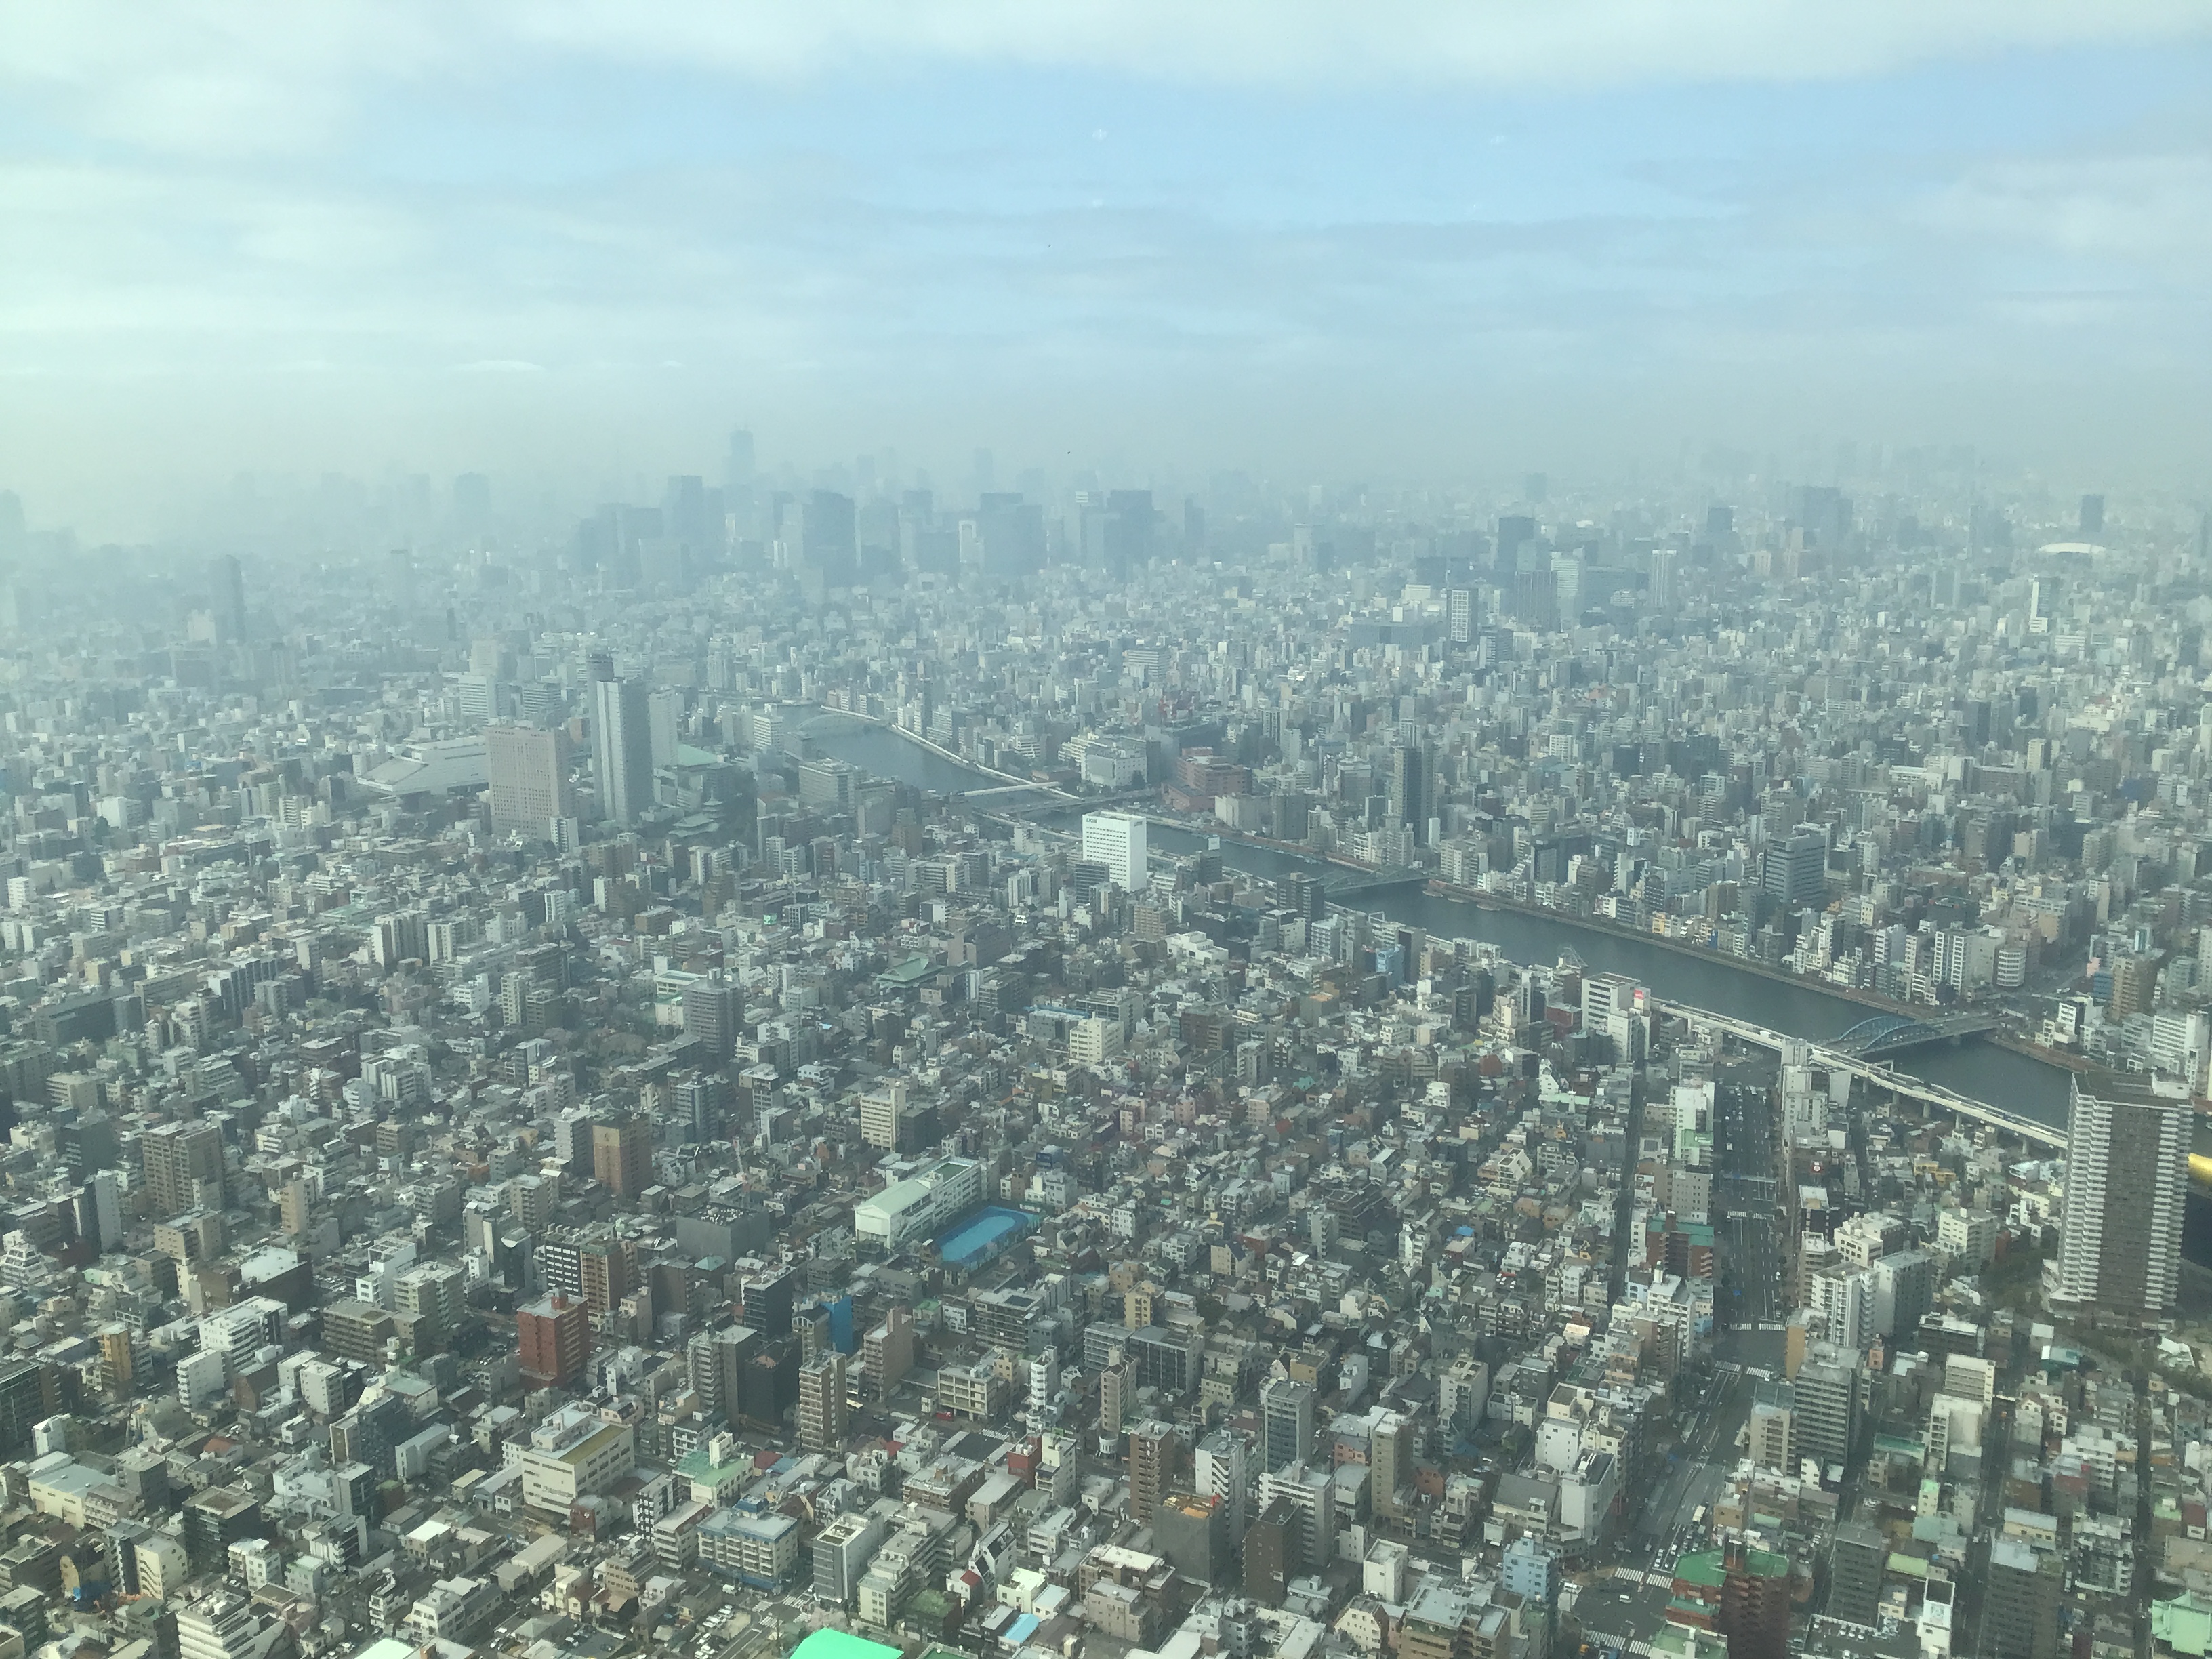 Tokyo from the SkyTree